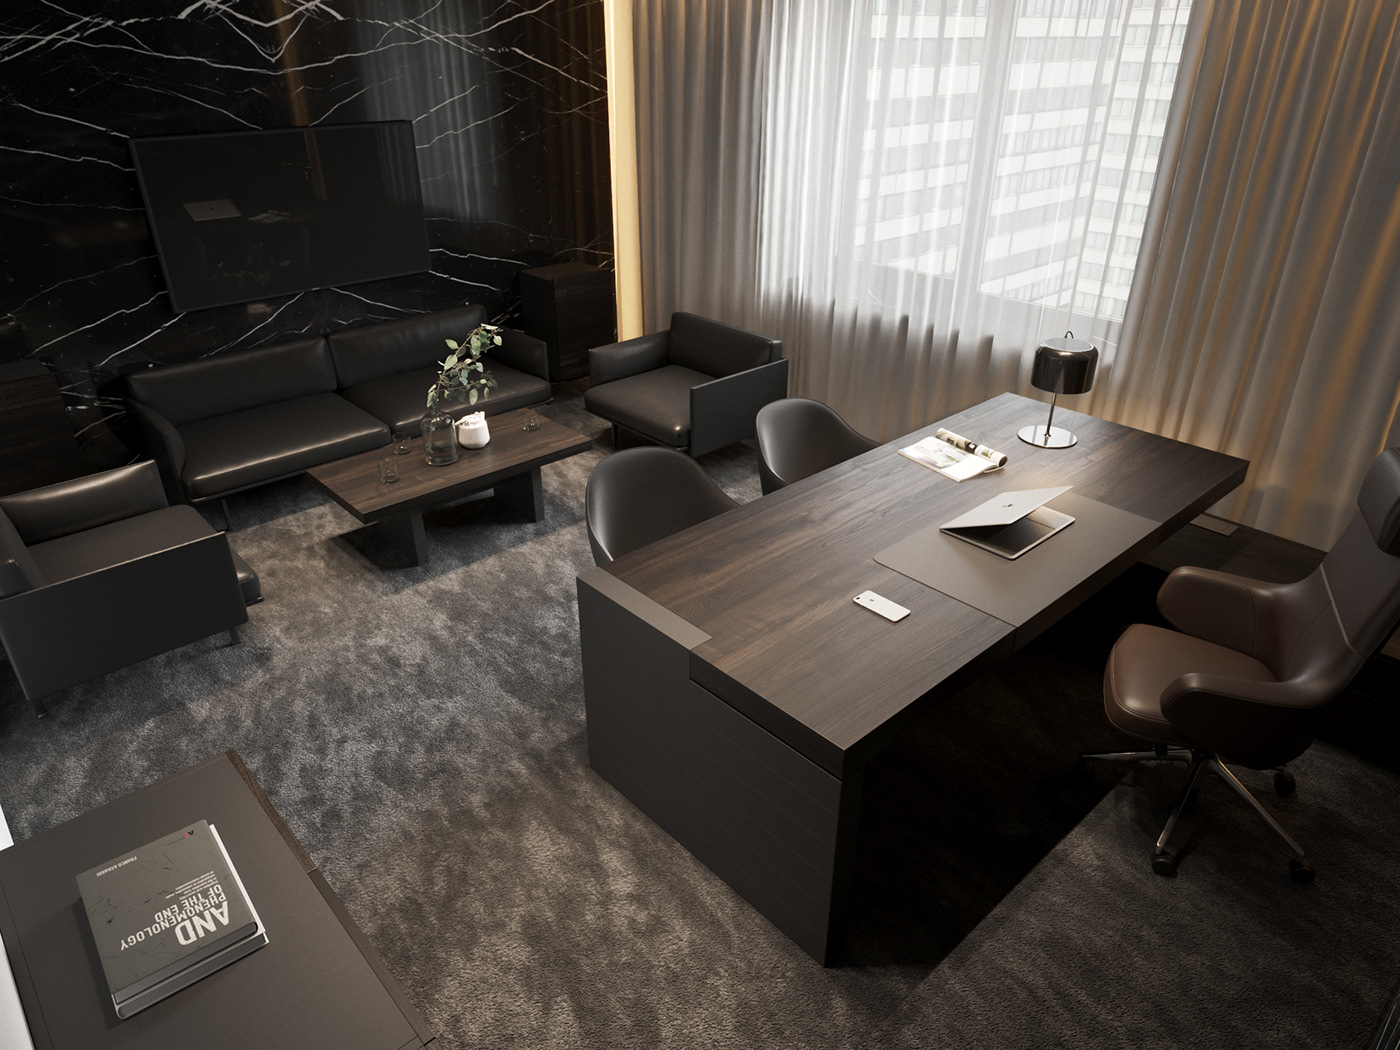 Private office on Behance
